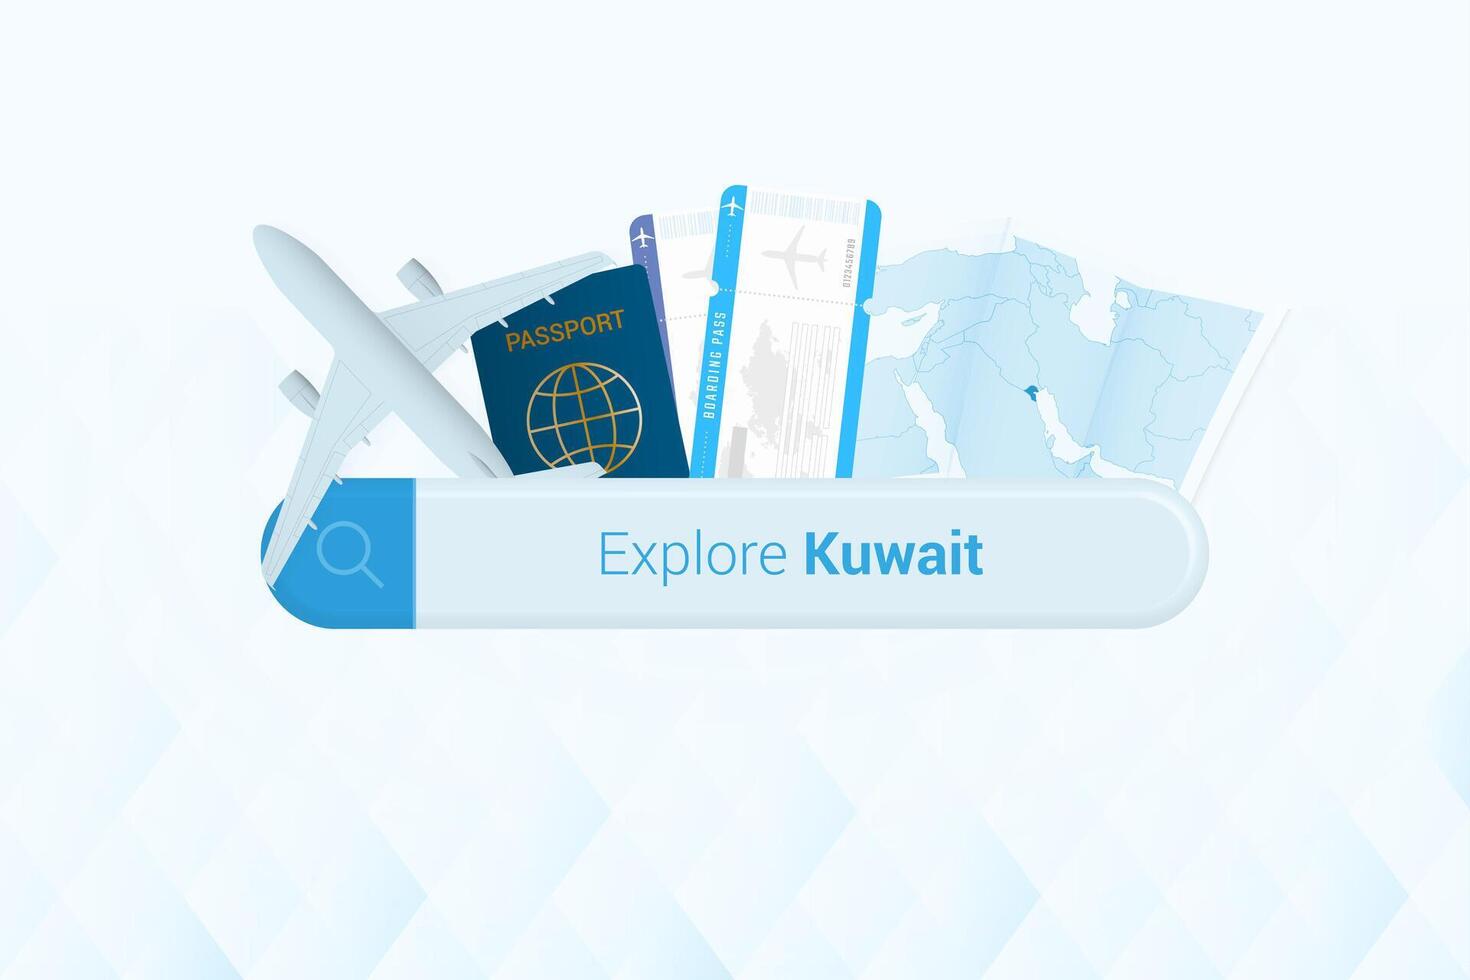 Searching tickets to Kuwait or travel destination in Kuwait. Searching bar with airplane, passport, boarding pass, tickets and map. vector